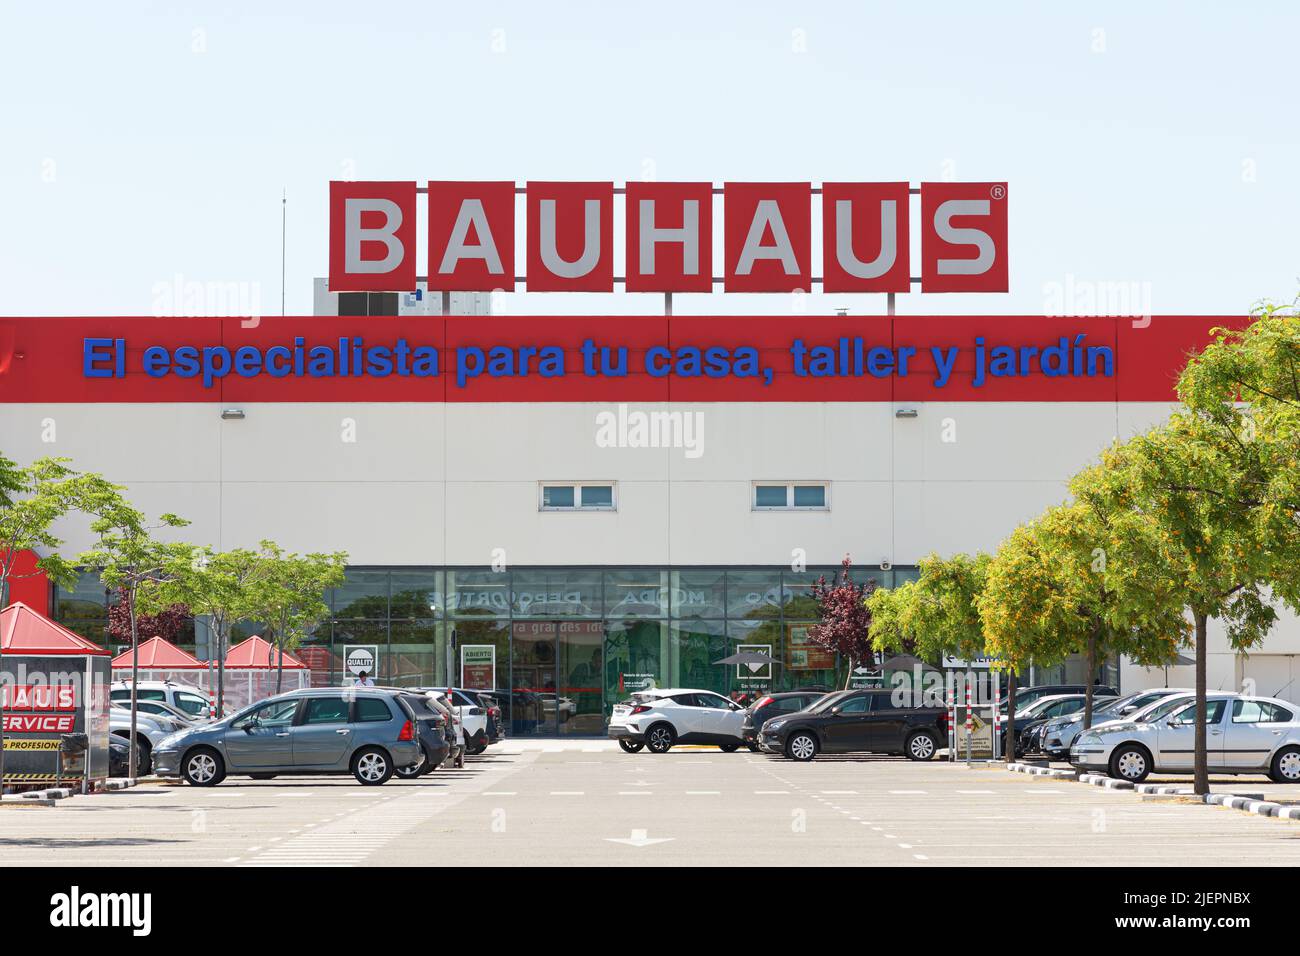 ALFAFAR, SPAIN - JUNE 06, 2022: Bauhaus is a German retail chain offering products for home improvement and gardening Stock Photo